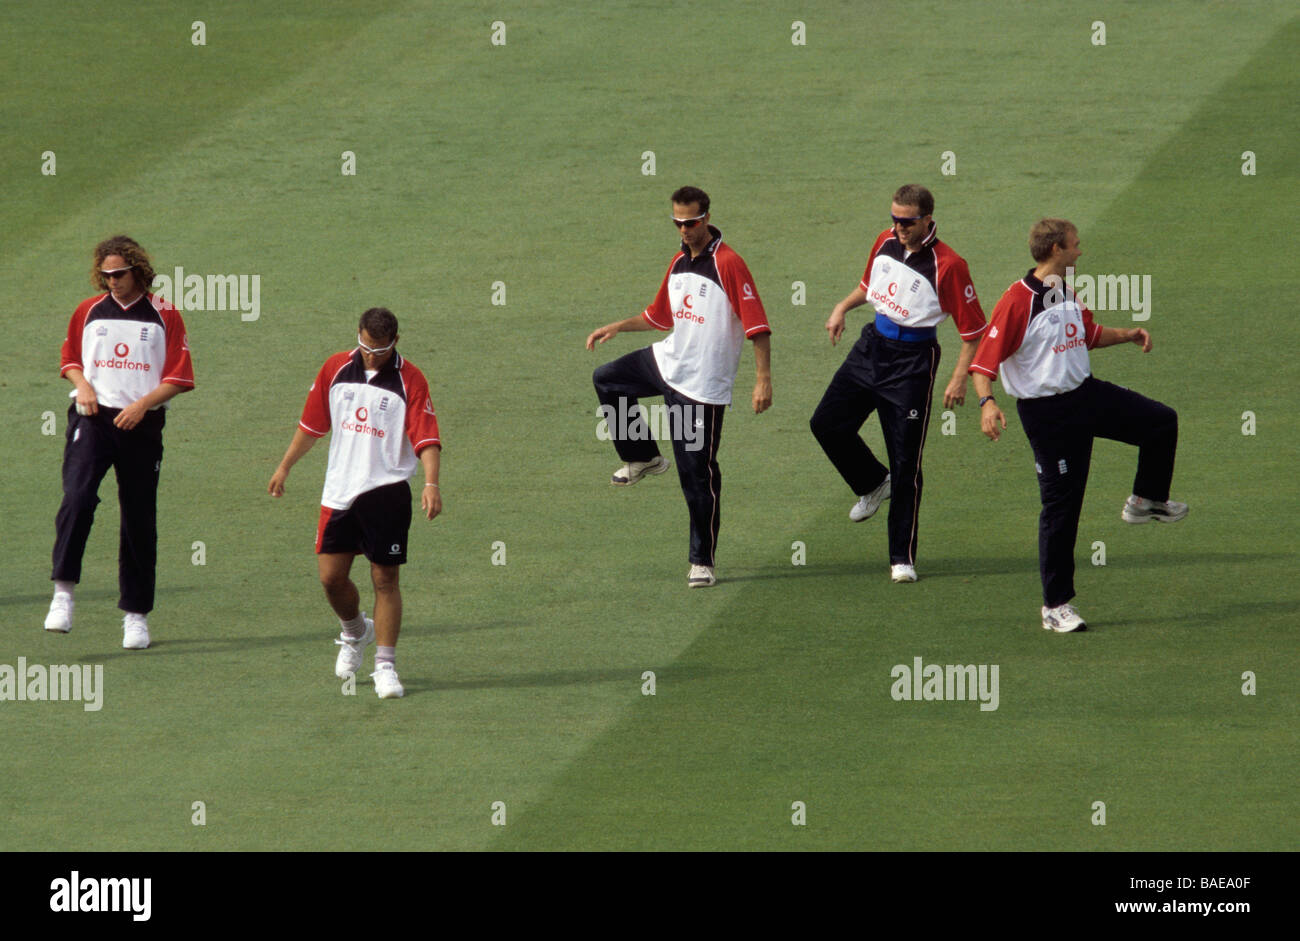 England cricket team doing warming up exercises like a tribal dance on the cricket pitch at Lords before a match with Pakistan Stock Photo